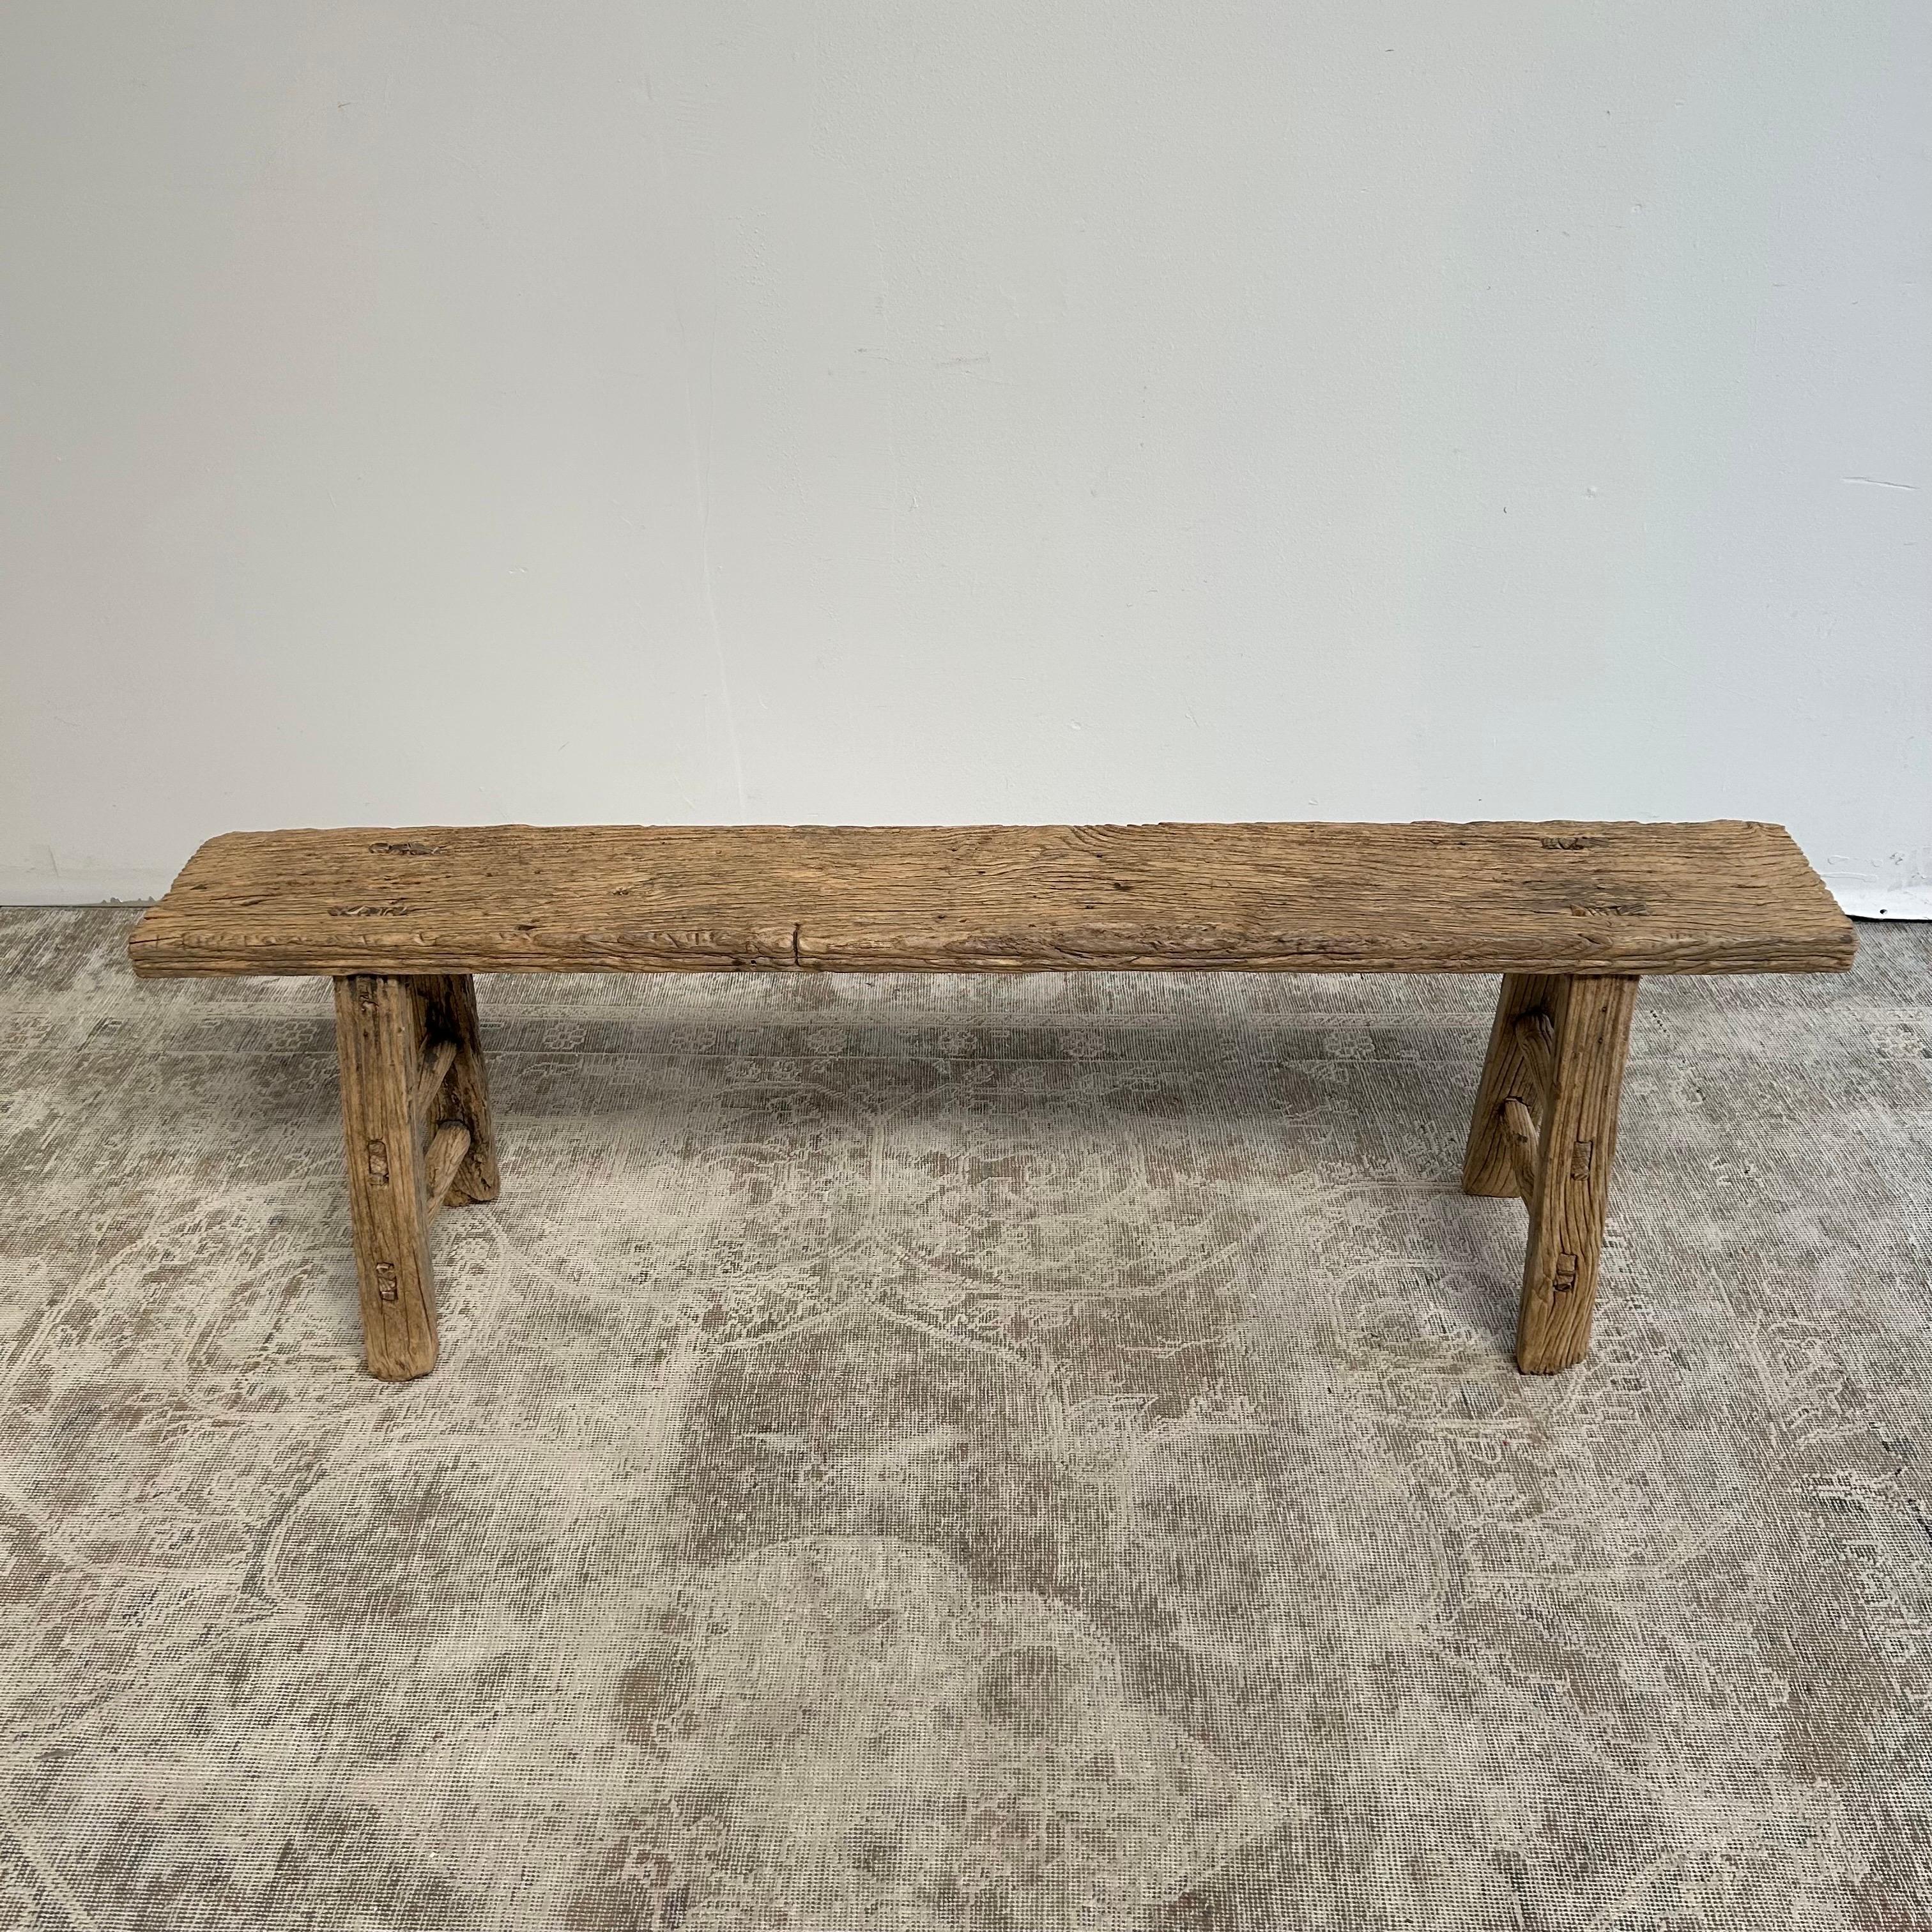 Asian Vintage Elm Wood Bench with Aged Patina